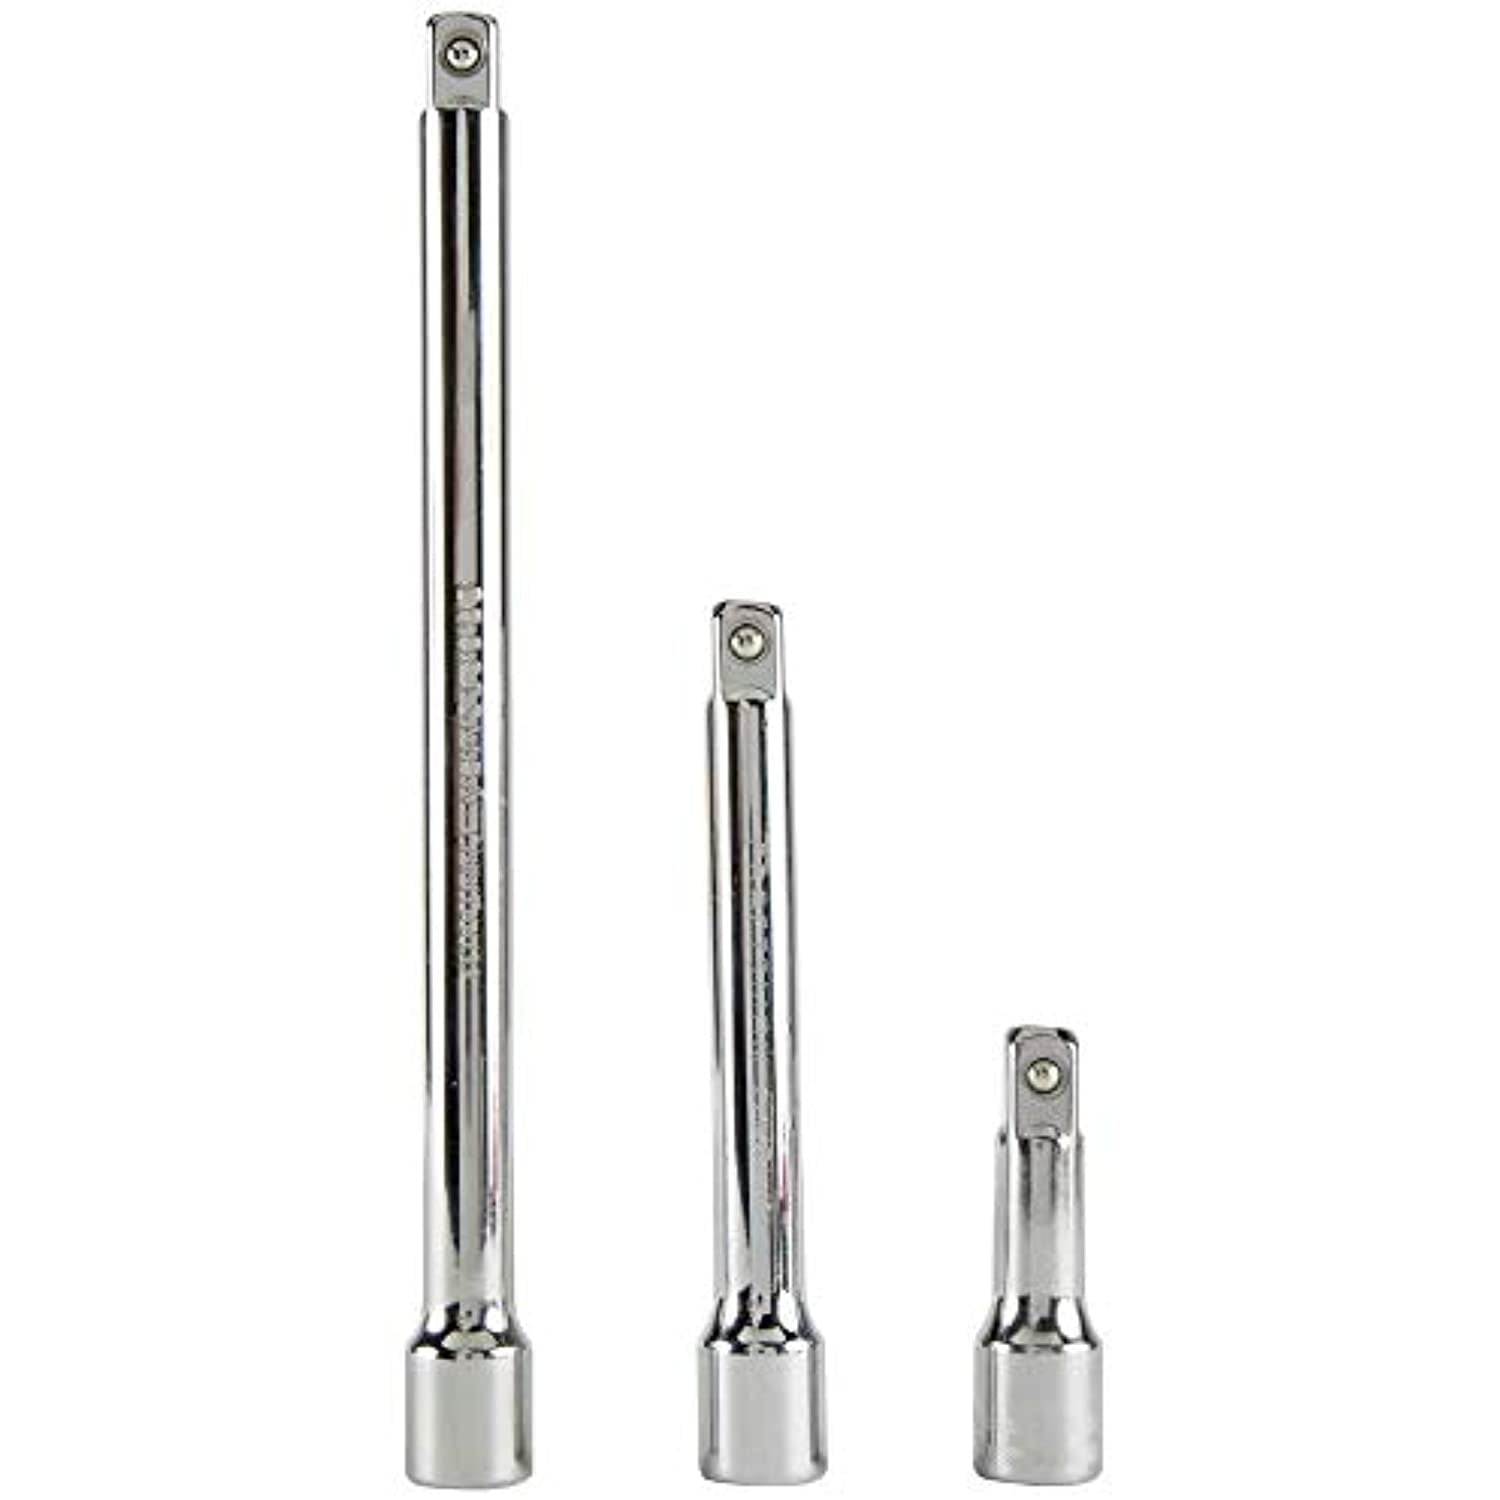 Details about   CRAFTSMAN 1/2 INCH DRIVE 3 INCH EXTENSION CHROME 